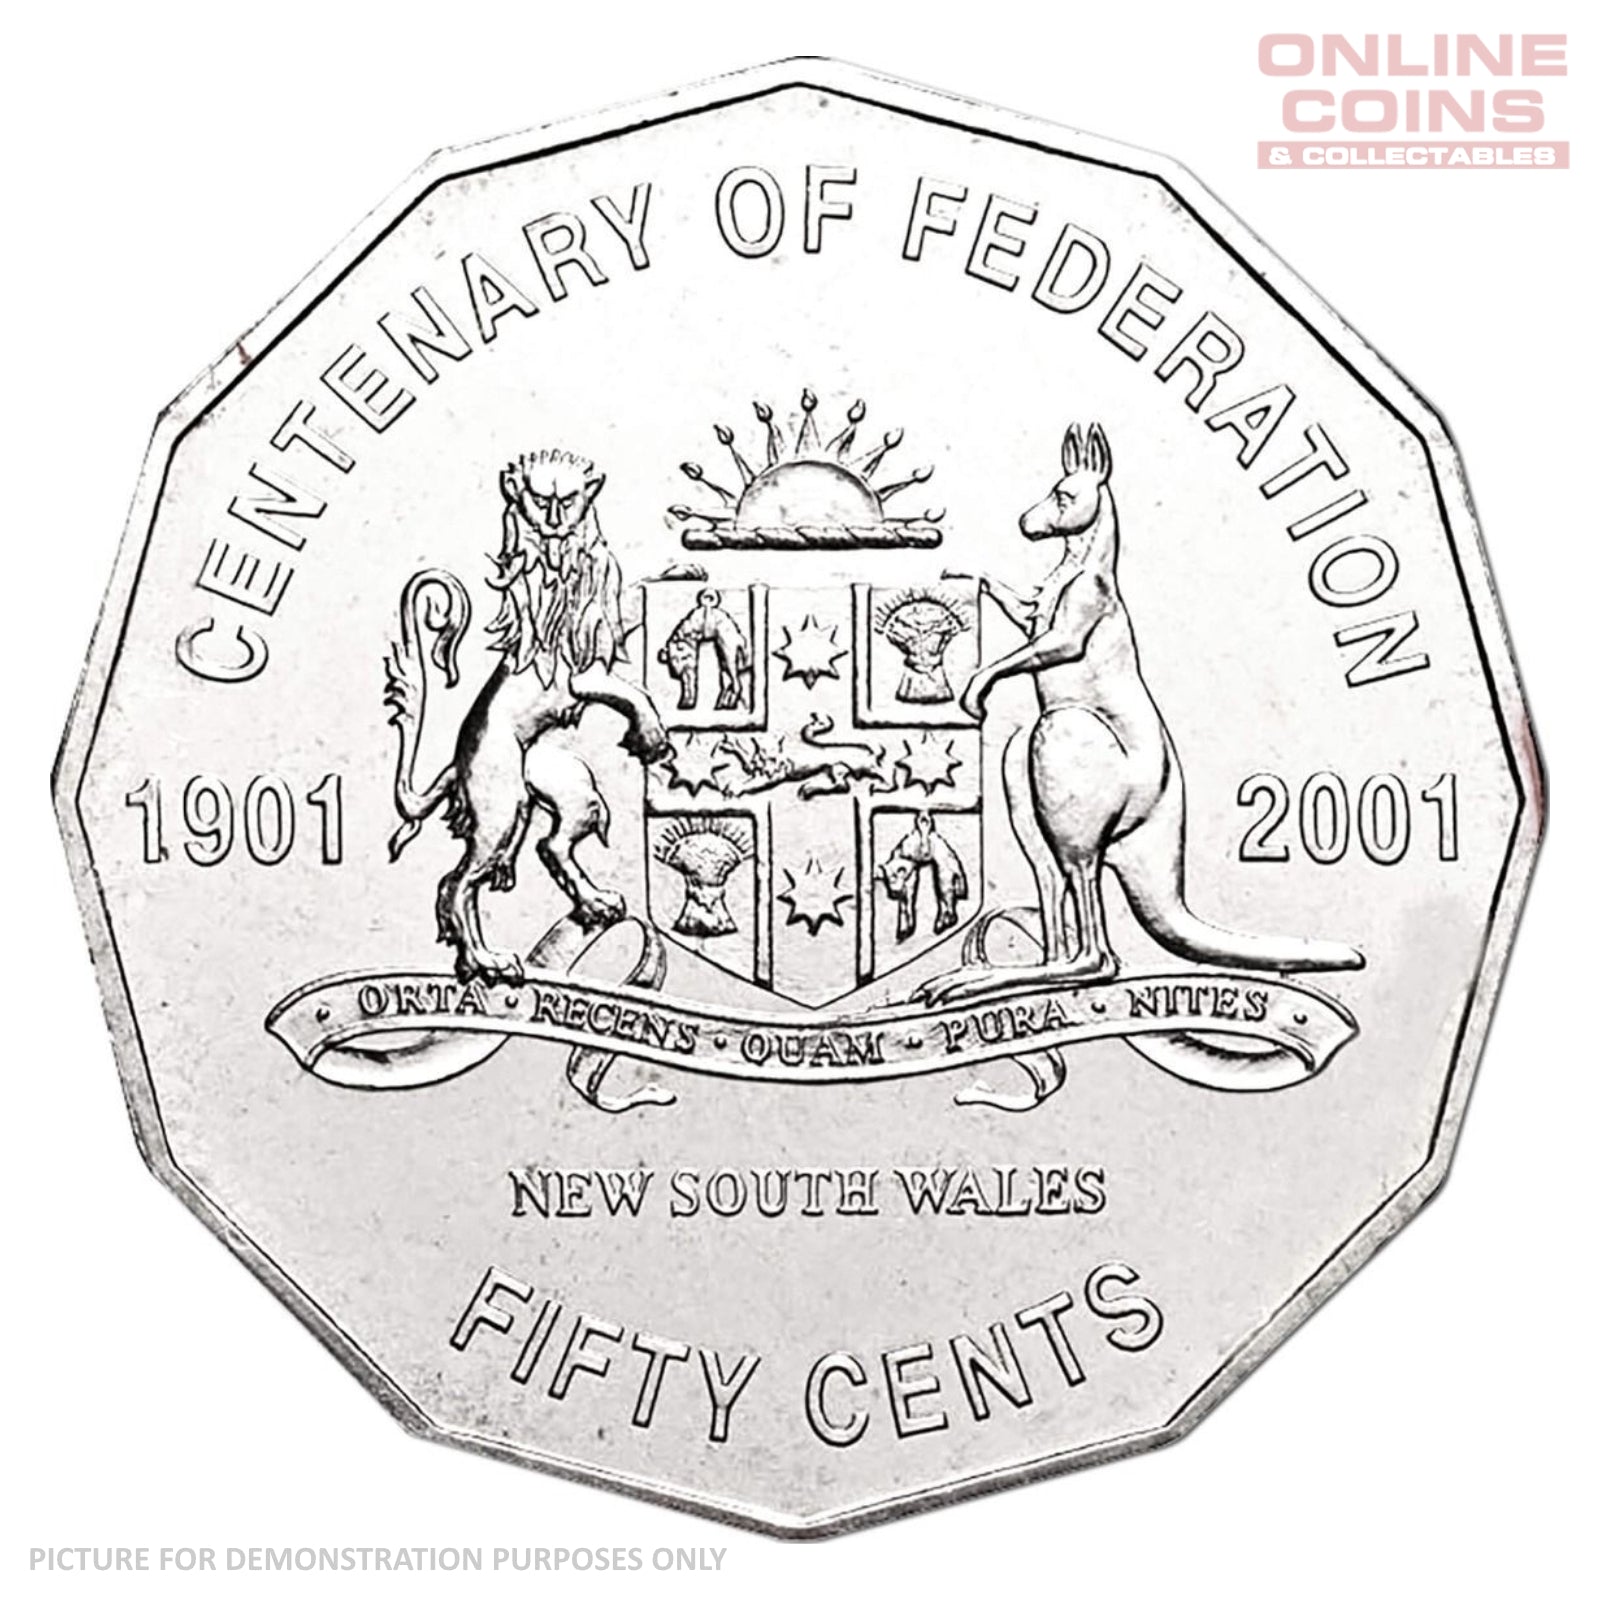 2001 RAM Centenary of Federation 50c Circulating Coin - NEW SOUTH